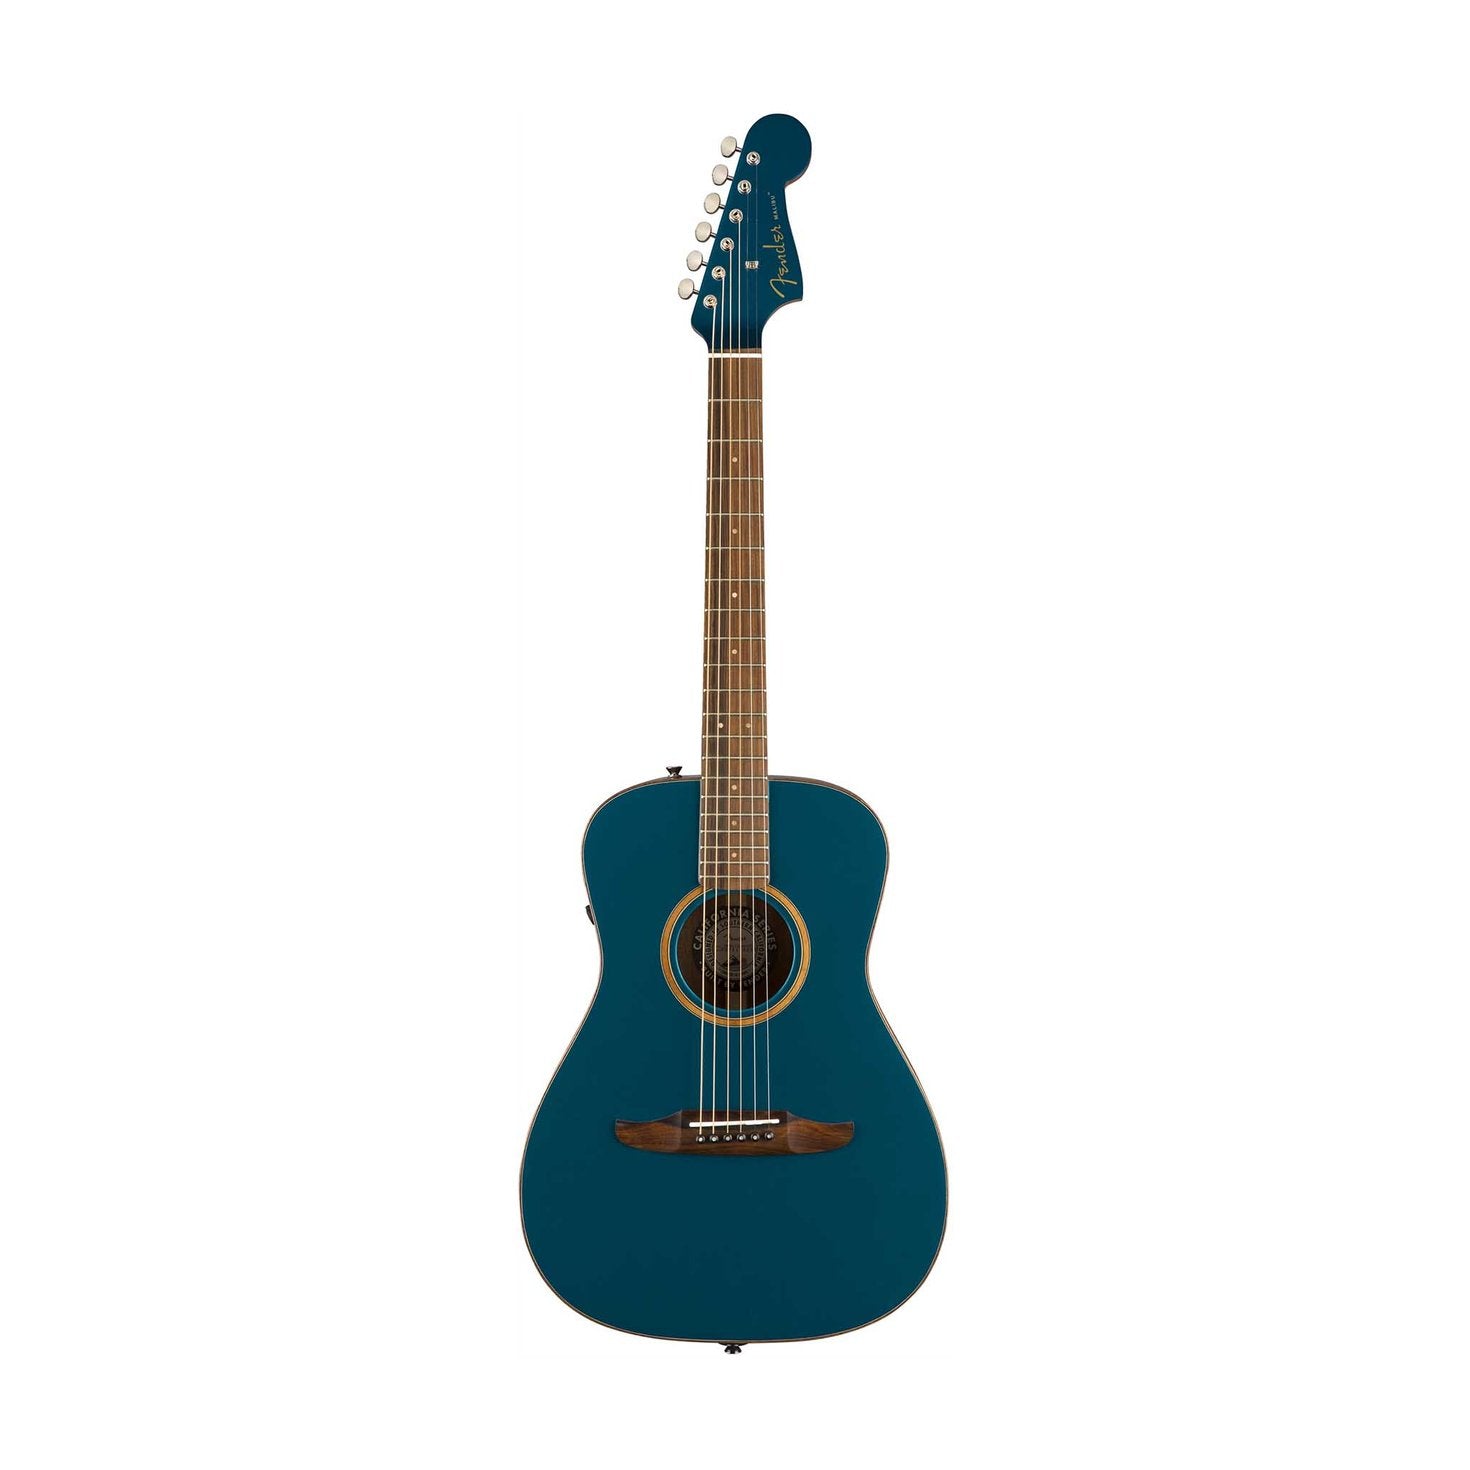 Fender Malibu Classic Small-Bodied Acoustic Guitar w/Bag, Cosmic Turquoise, FENDER, ACOUSTIC GUITAR, fender-acoustic-guitar-f03-097-0922-299, ZOSO MUSIC SDN BHD